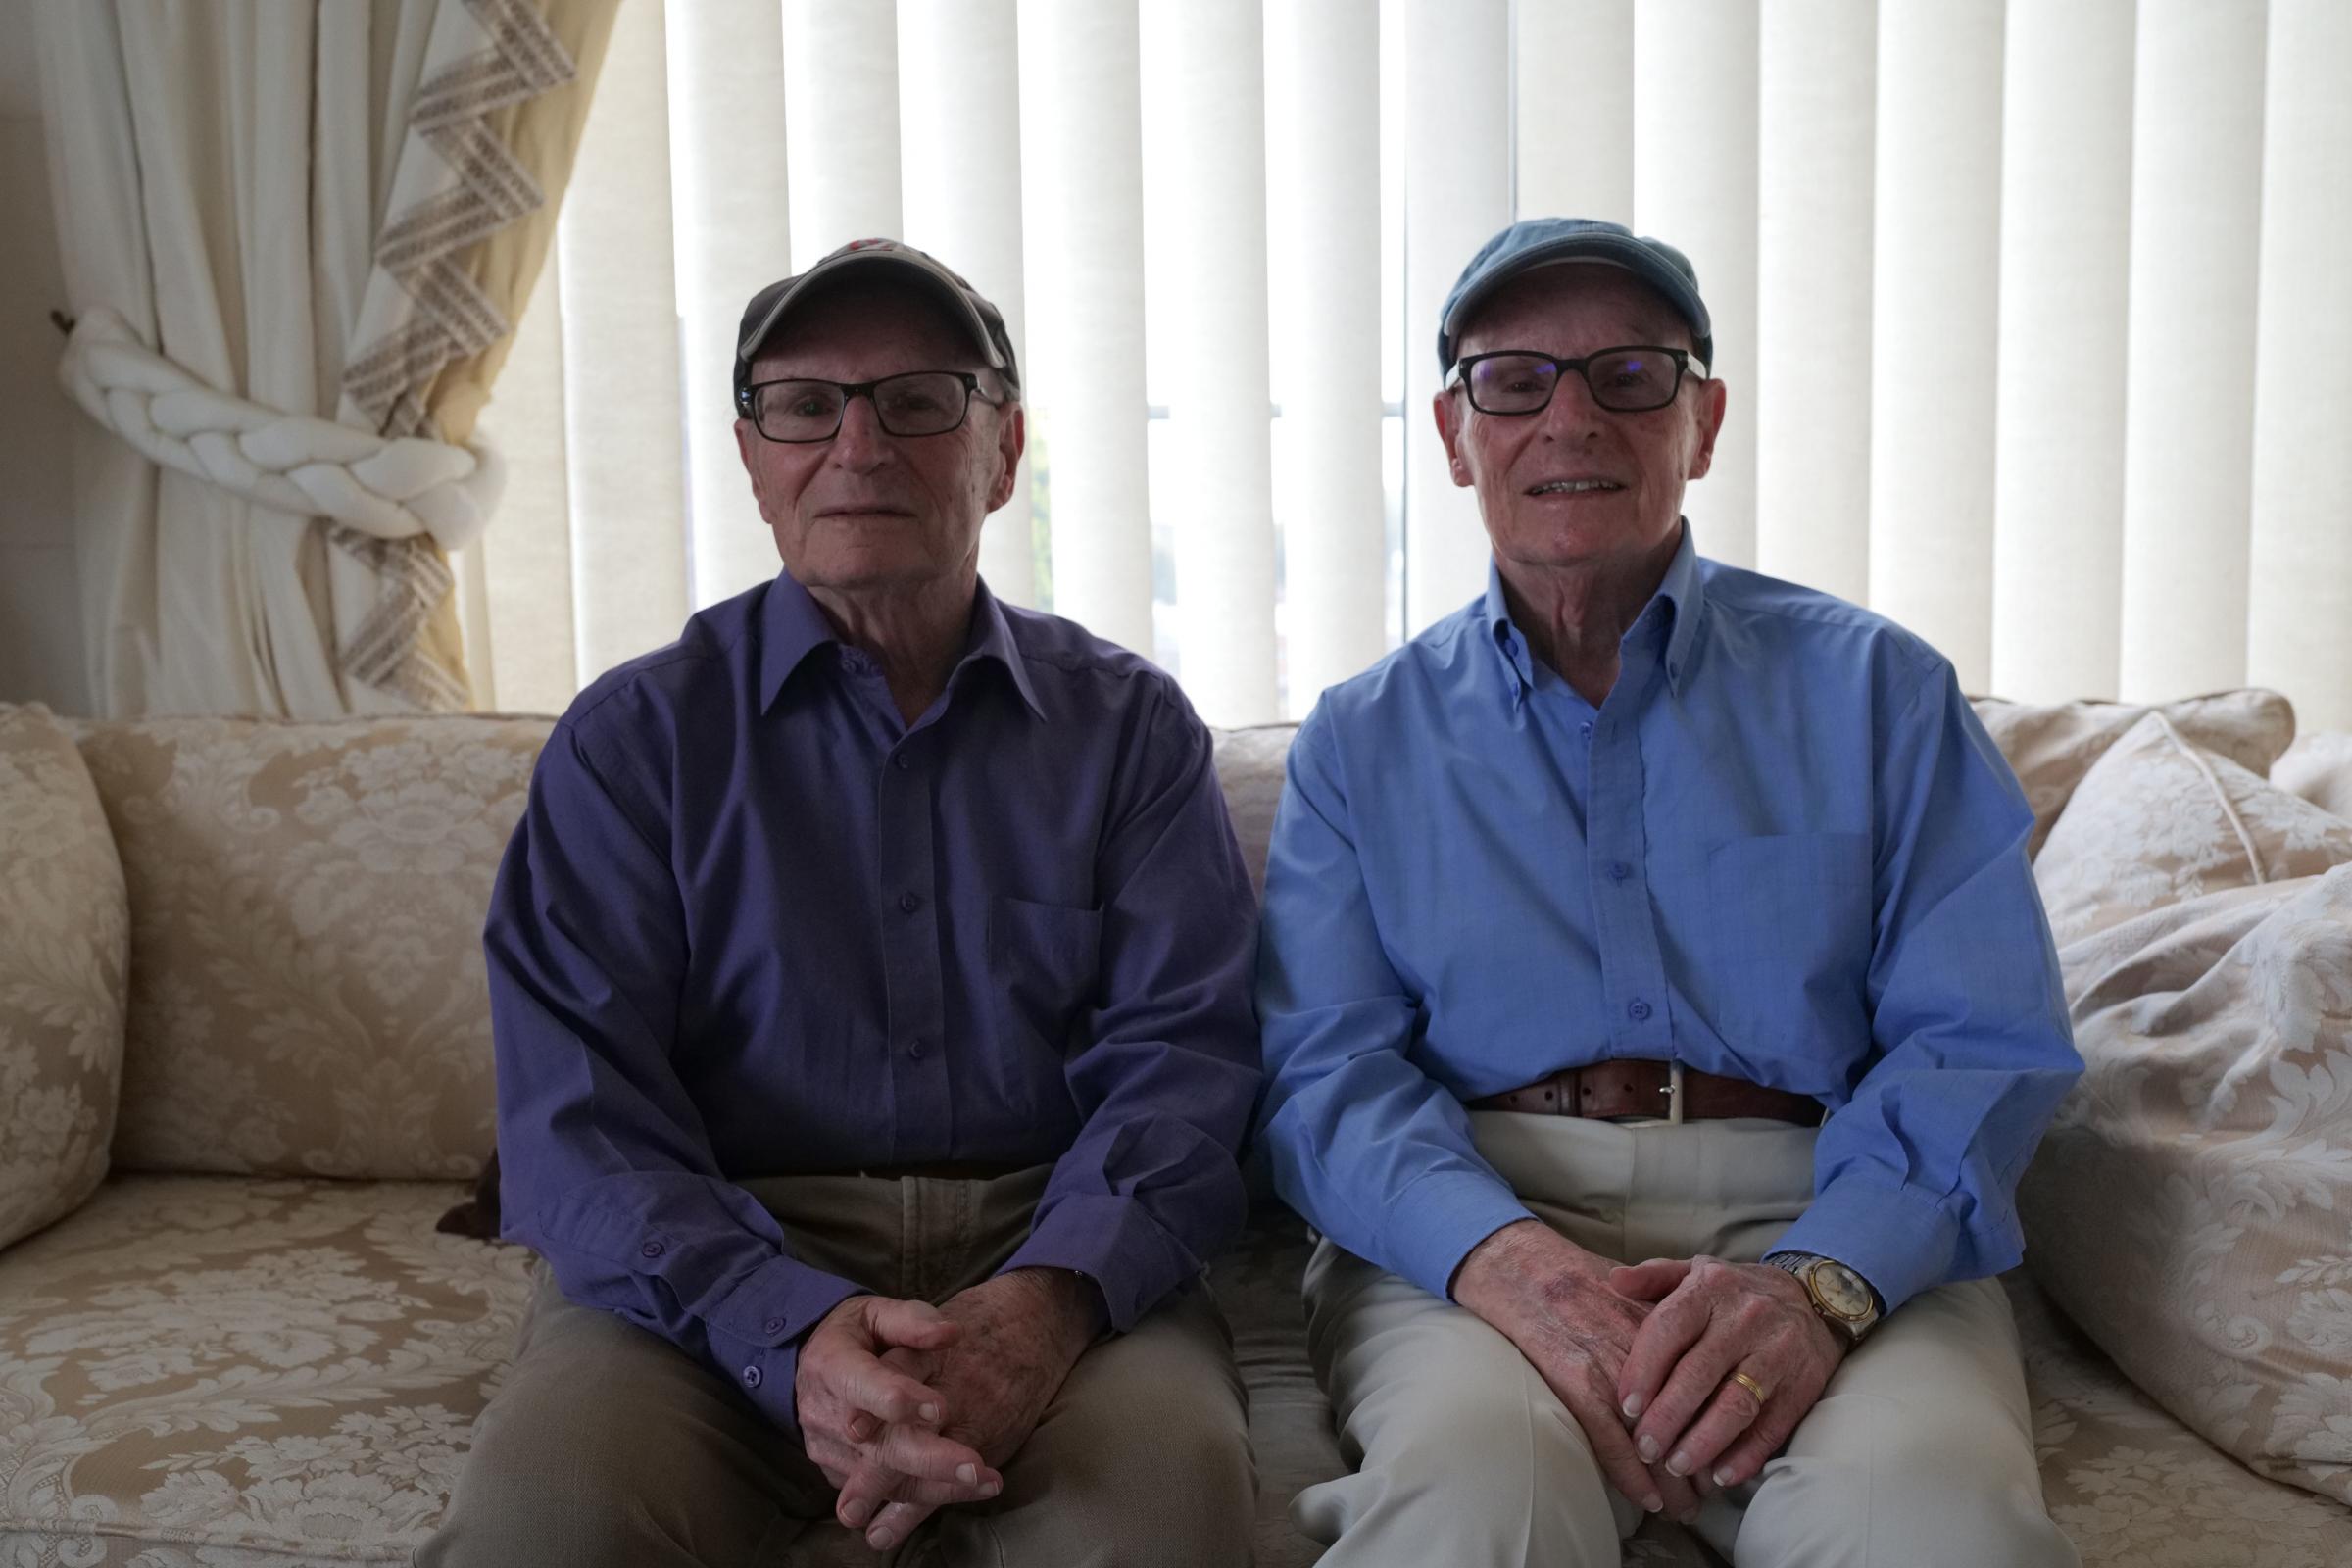 Saved By a Stranger: Identical twin brothers George and Peter